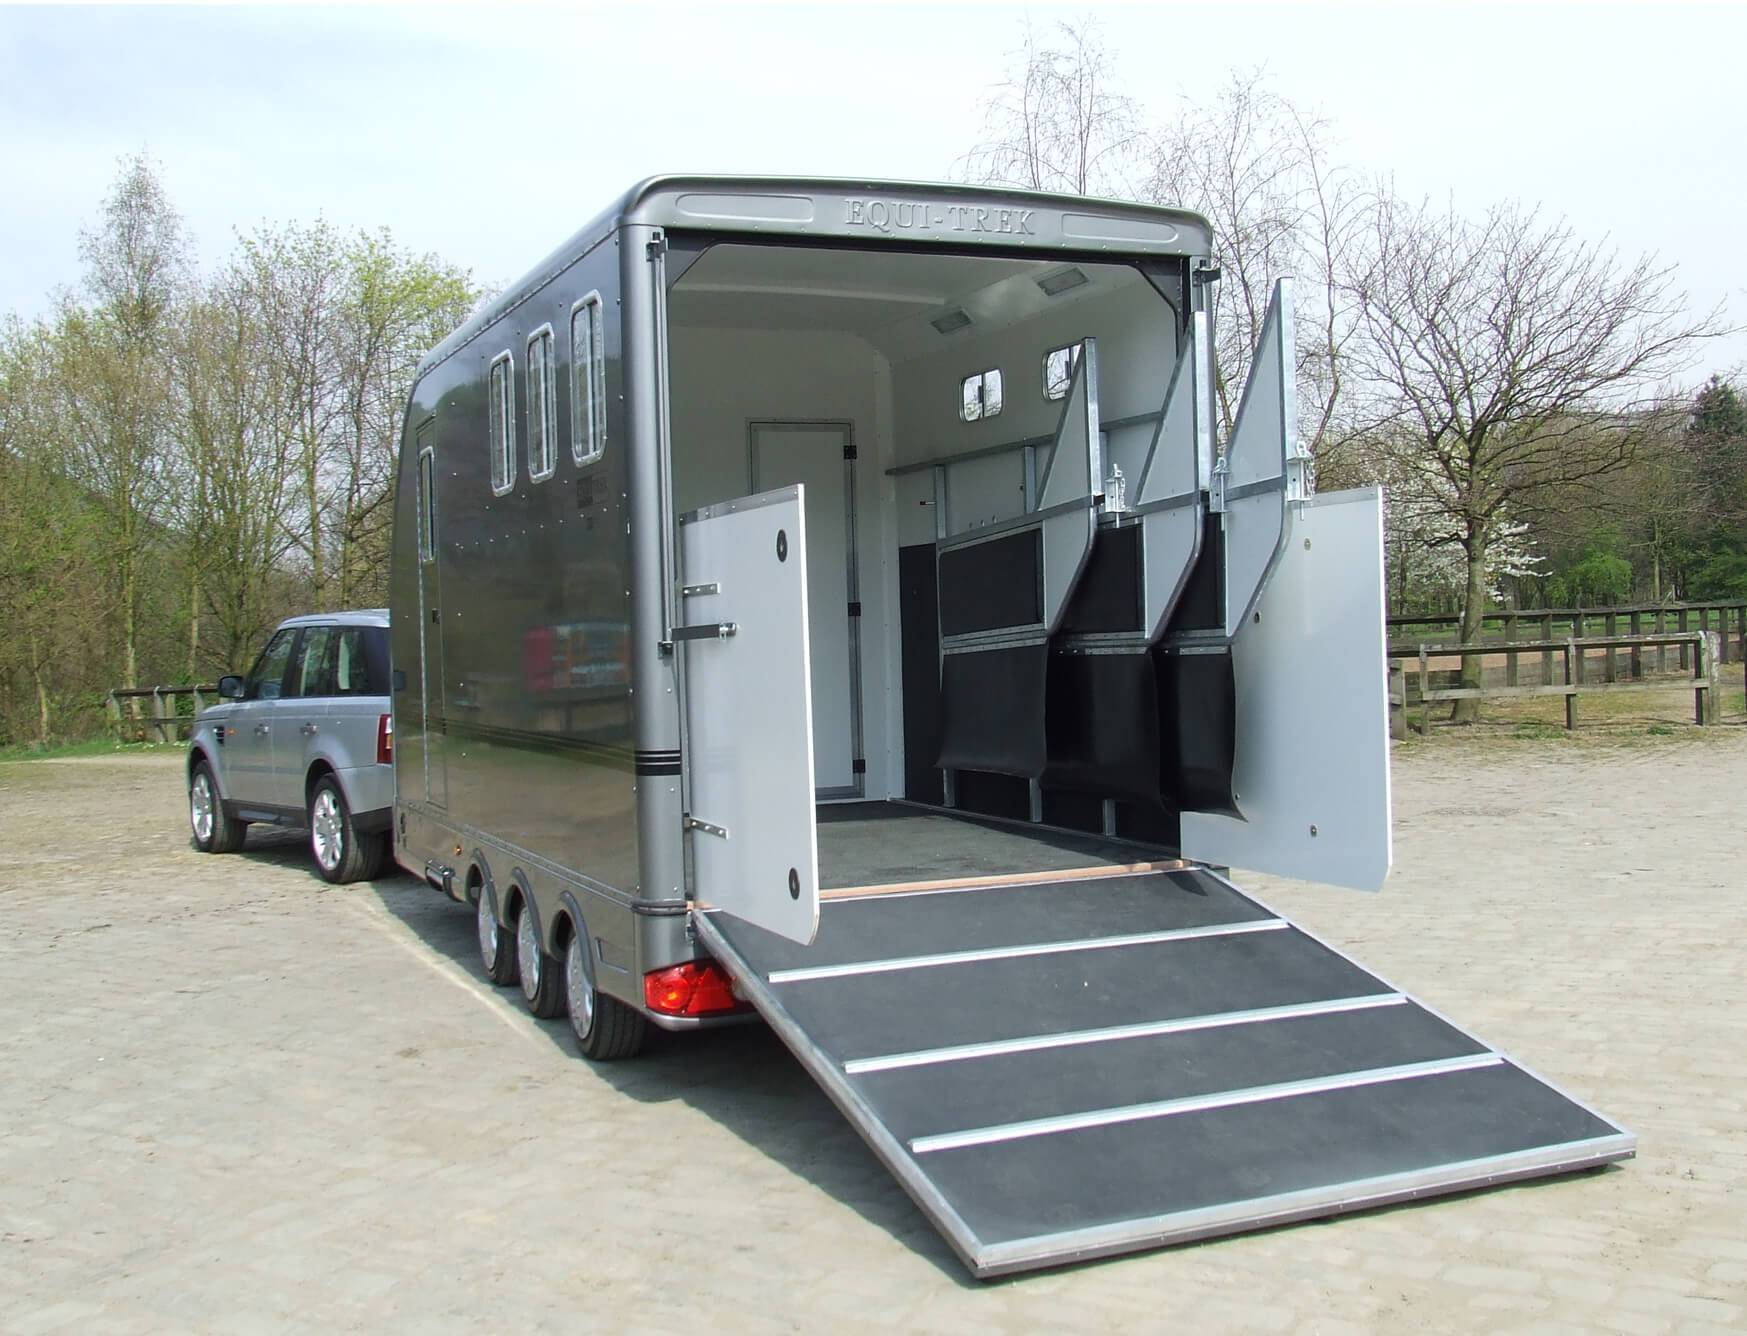 A horse trailer with its door open and ramp down ready for a horse to load up